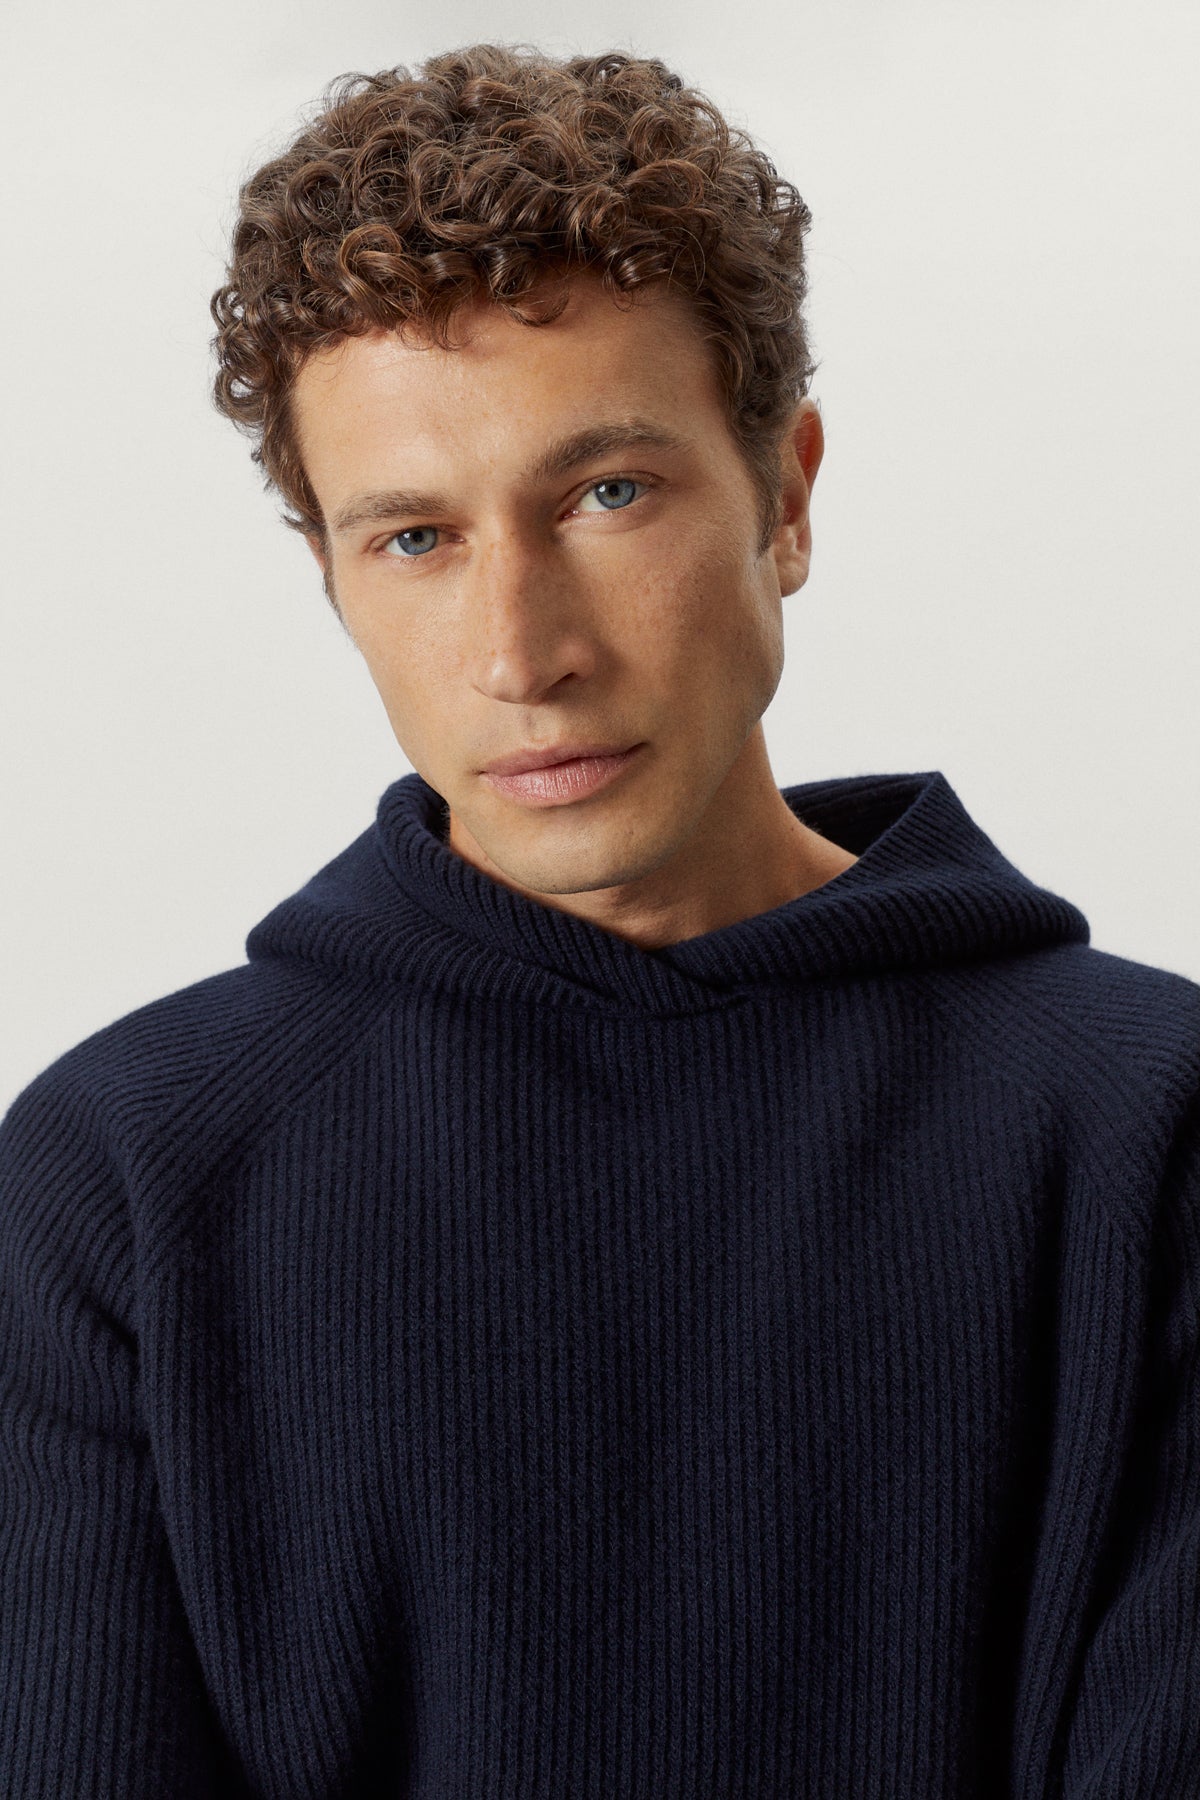 the woolen ribbed hoodie sweater blue navy